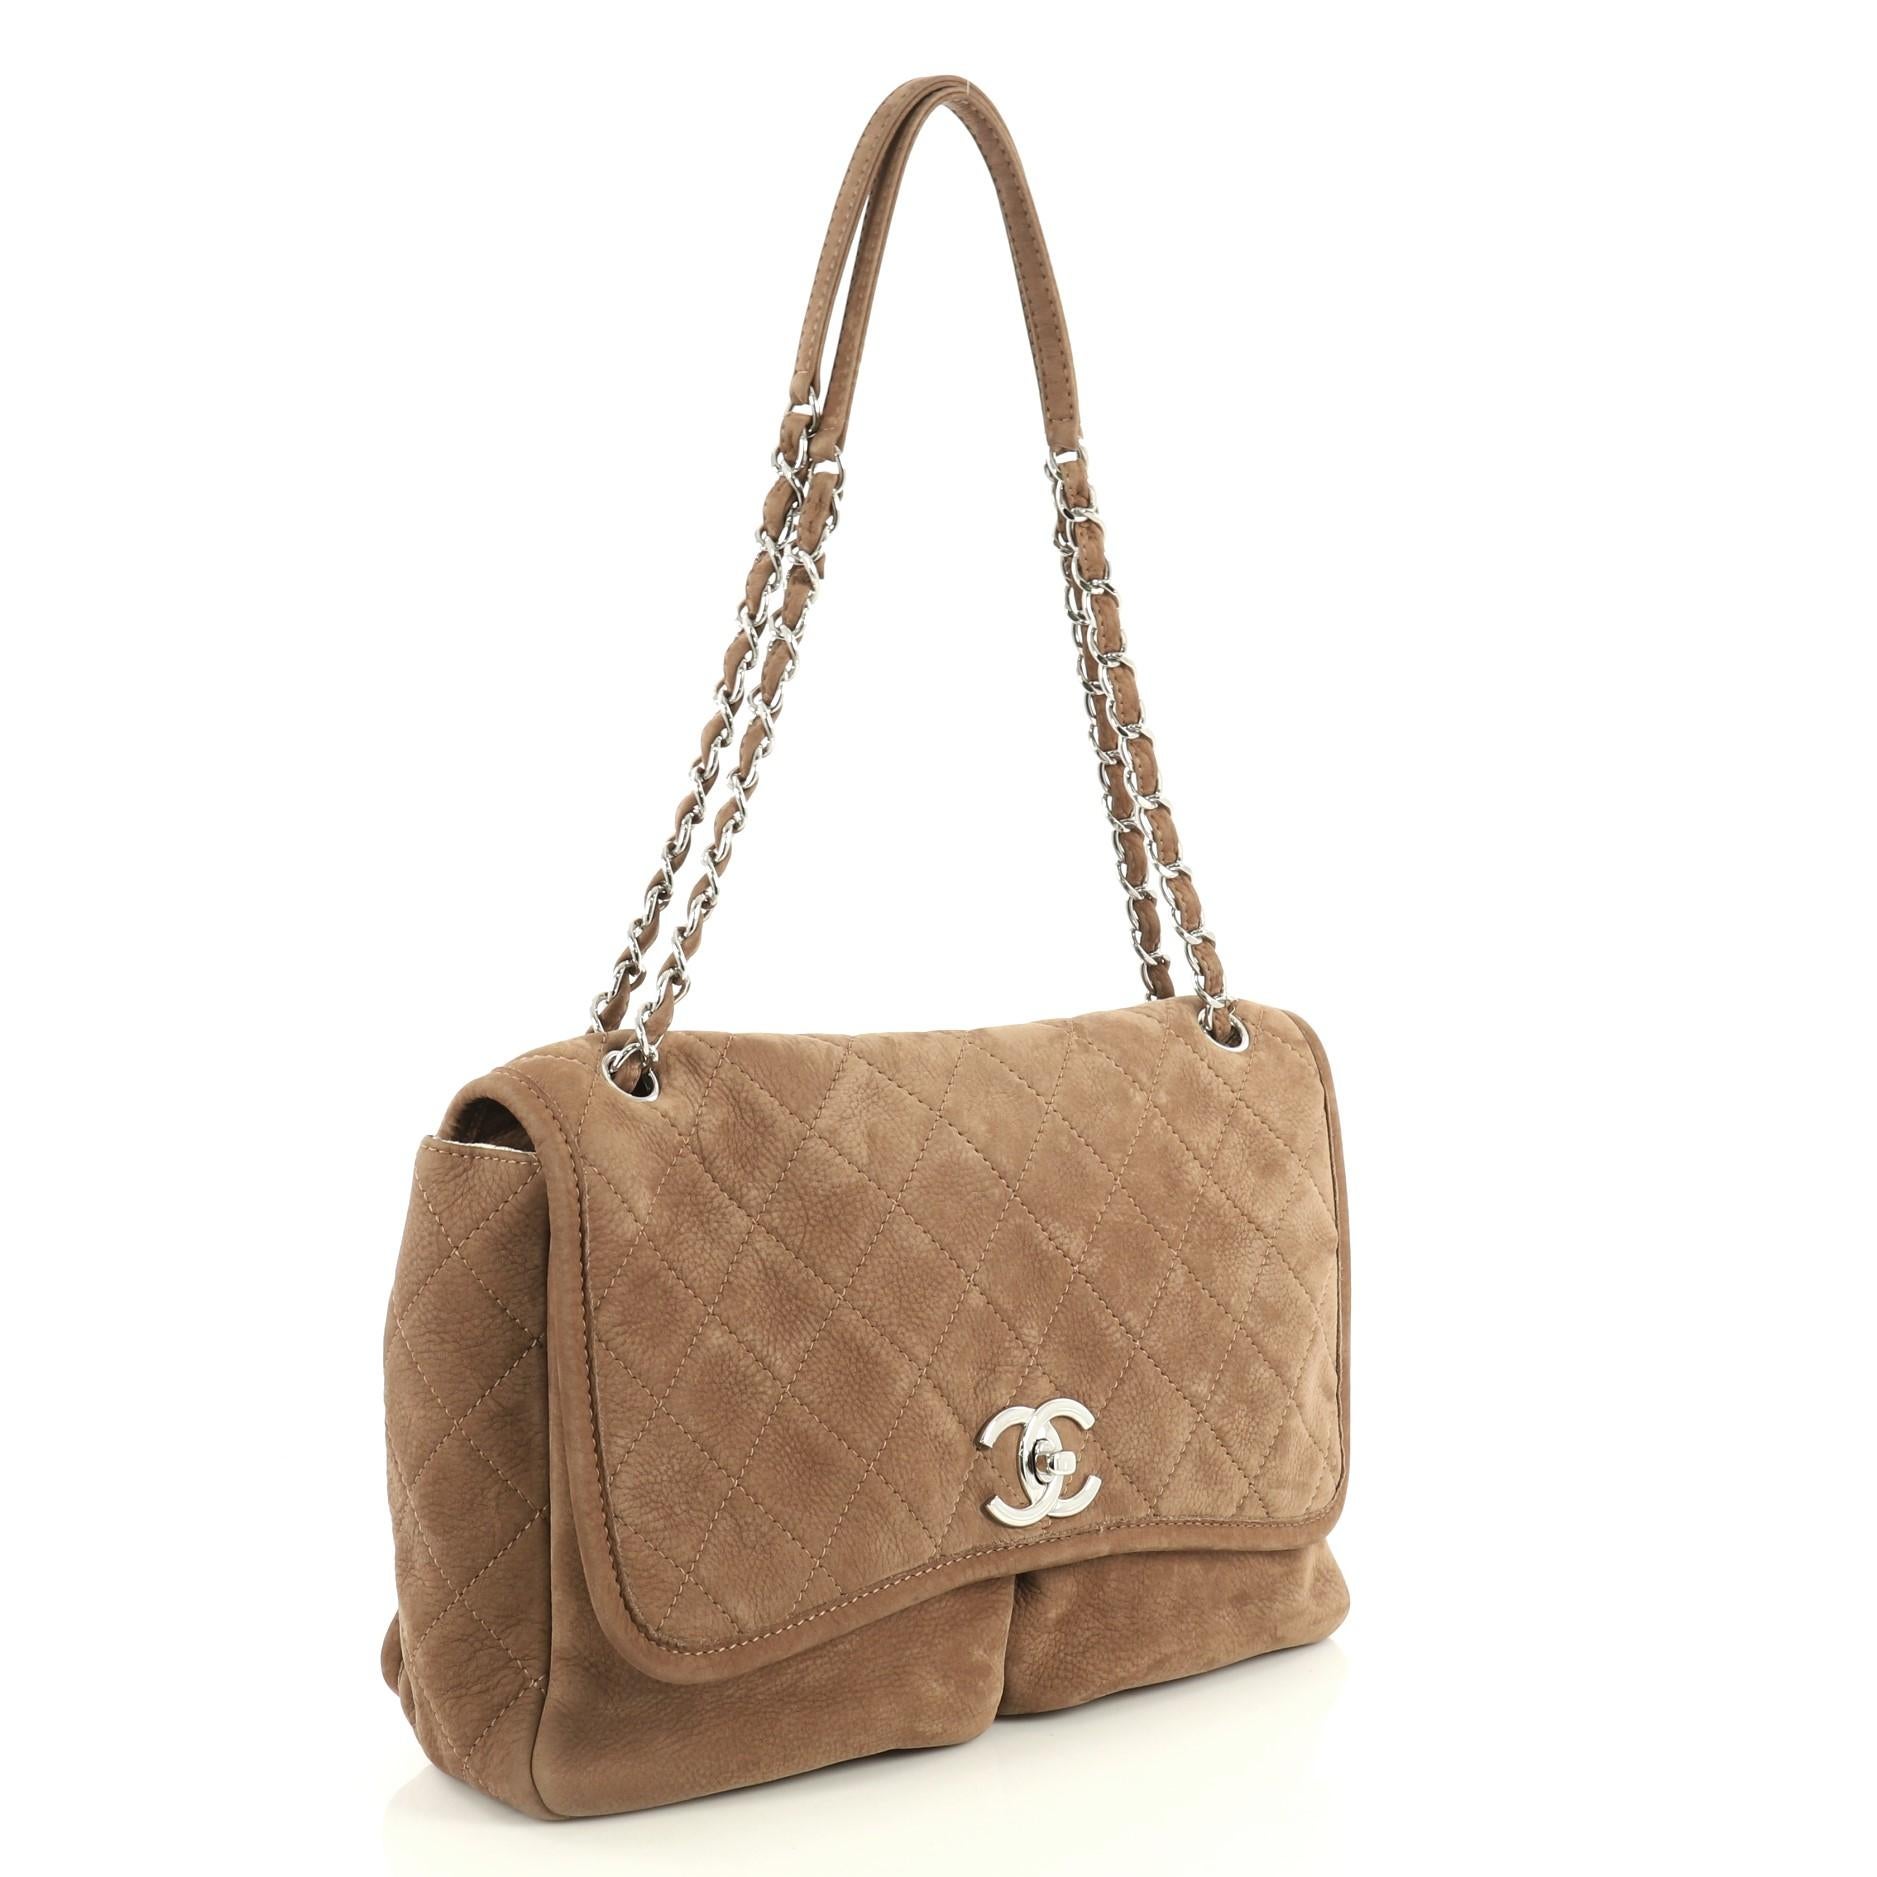 This Chanel Natural Beauty Split Pocket Flap Bag Quilted Nubuck Large, crafted in brown quilted nubuck, features woven-in leather chain straps, two slip pockets under flap and silver-tone hardware. Its CC turn-lock closure opens to a neutral fabric